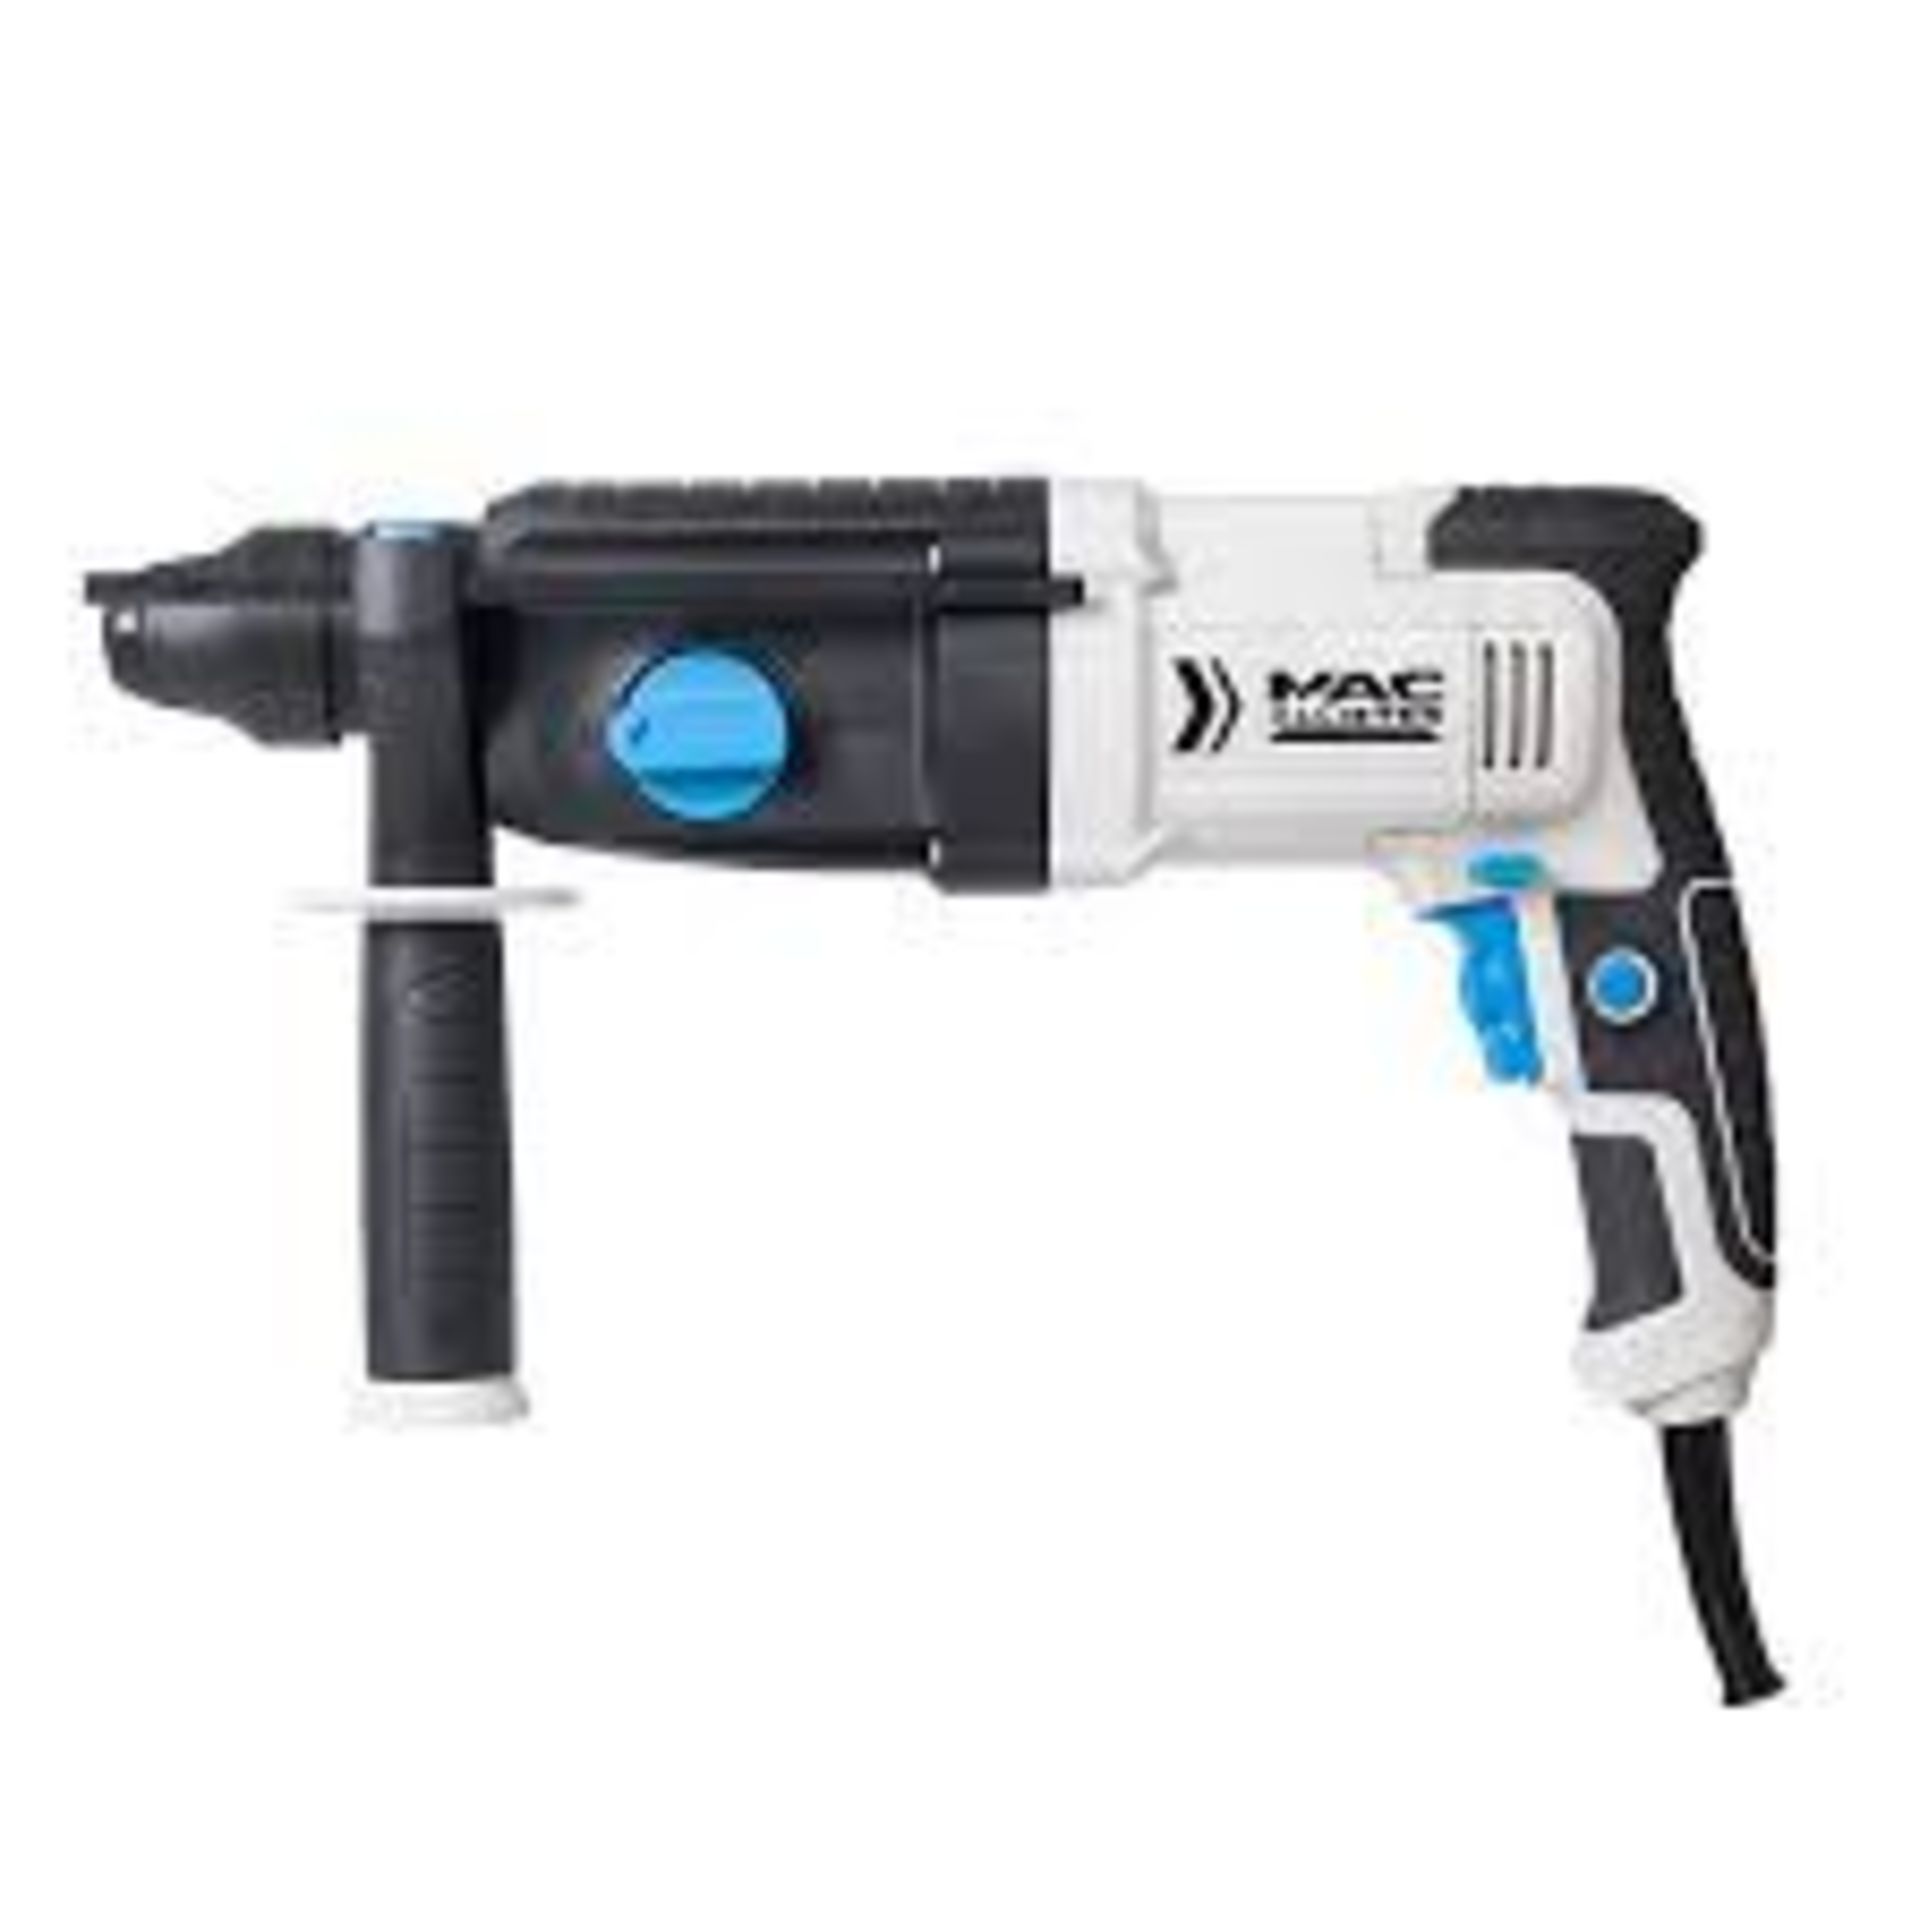 Mac Allister 240V 750W Corded SDS+ drill MRH750. - P4. Includes powerful 750W motor delivering a